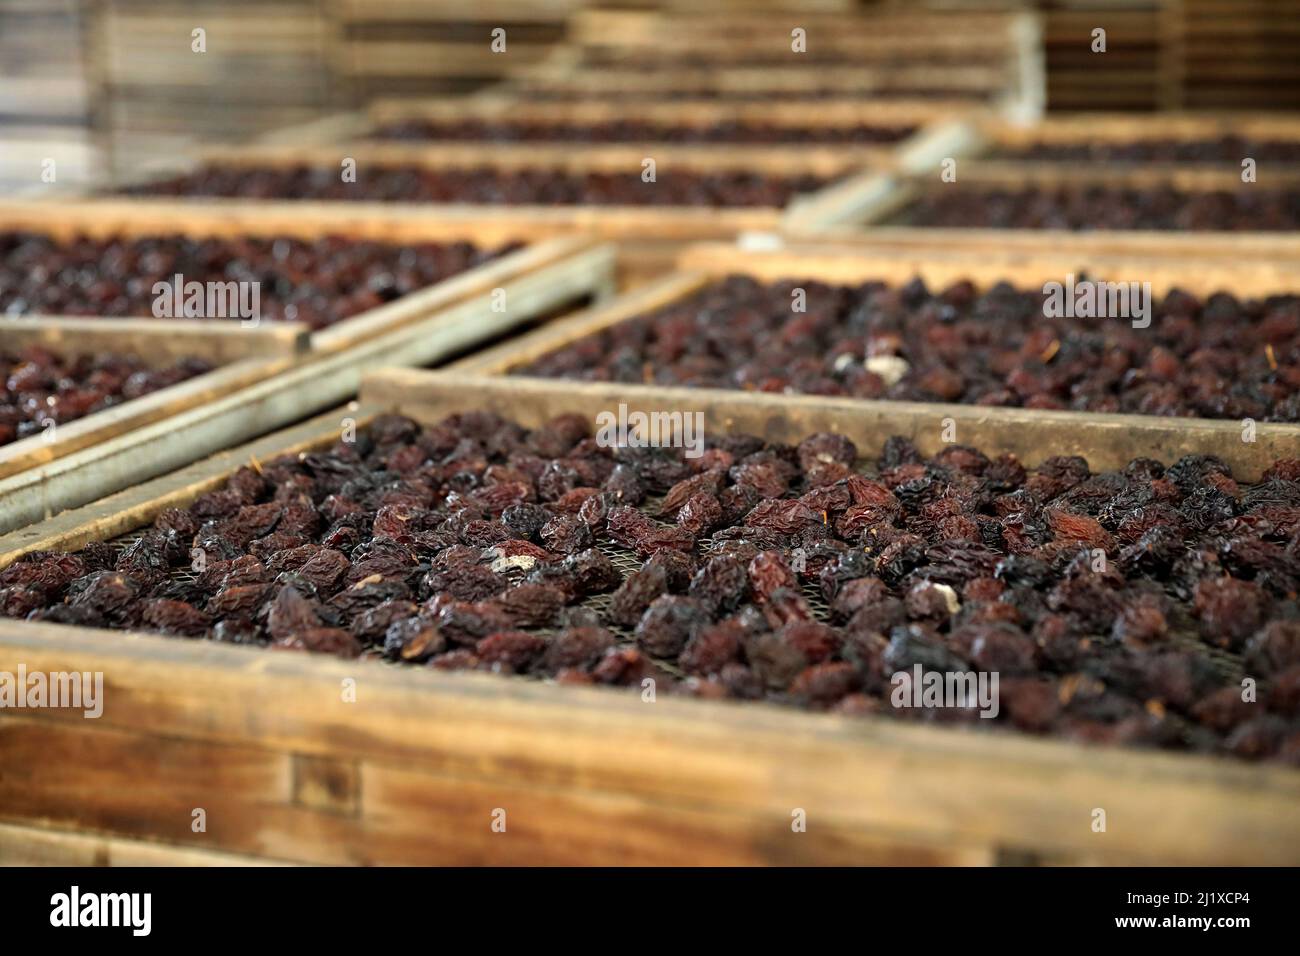 Cultivation of Agen prunes: Ente plum drying in crates after the harvest. The fruits are spread over trays to be dried Stock Photo